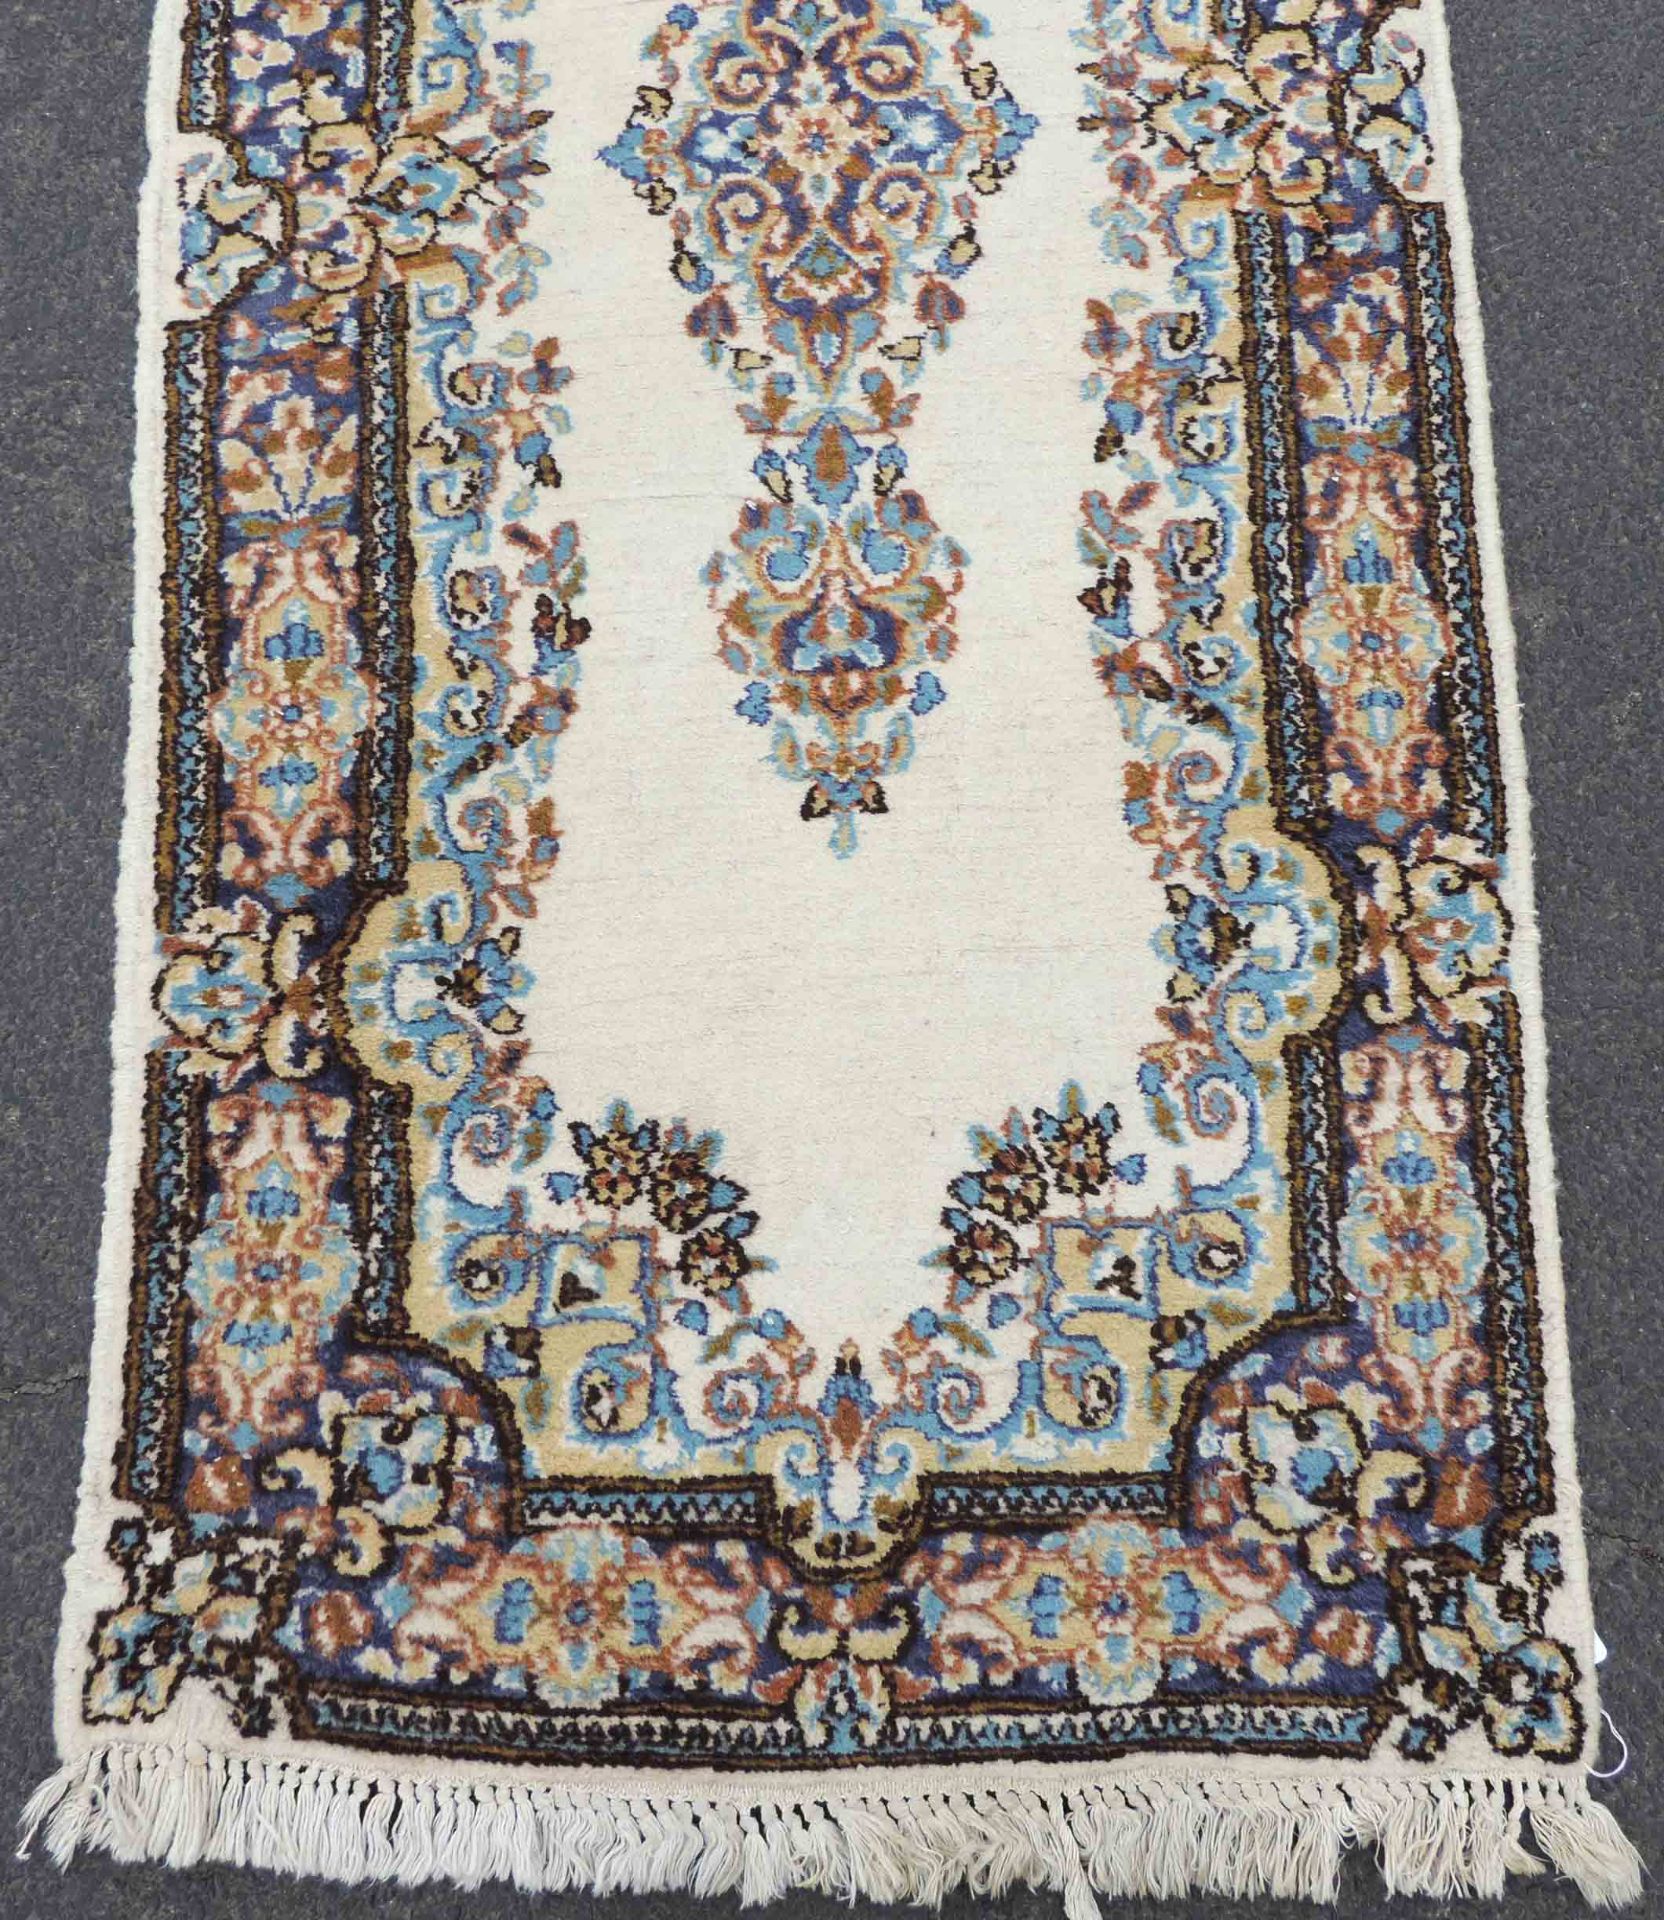 Kirman Persian rug. Narrow runner. Iran.370 cm x 63 cm. Knotted by hand. Wool on cotton. No shipping - Image 3 of 9